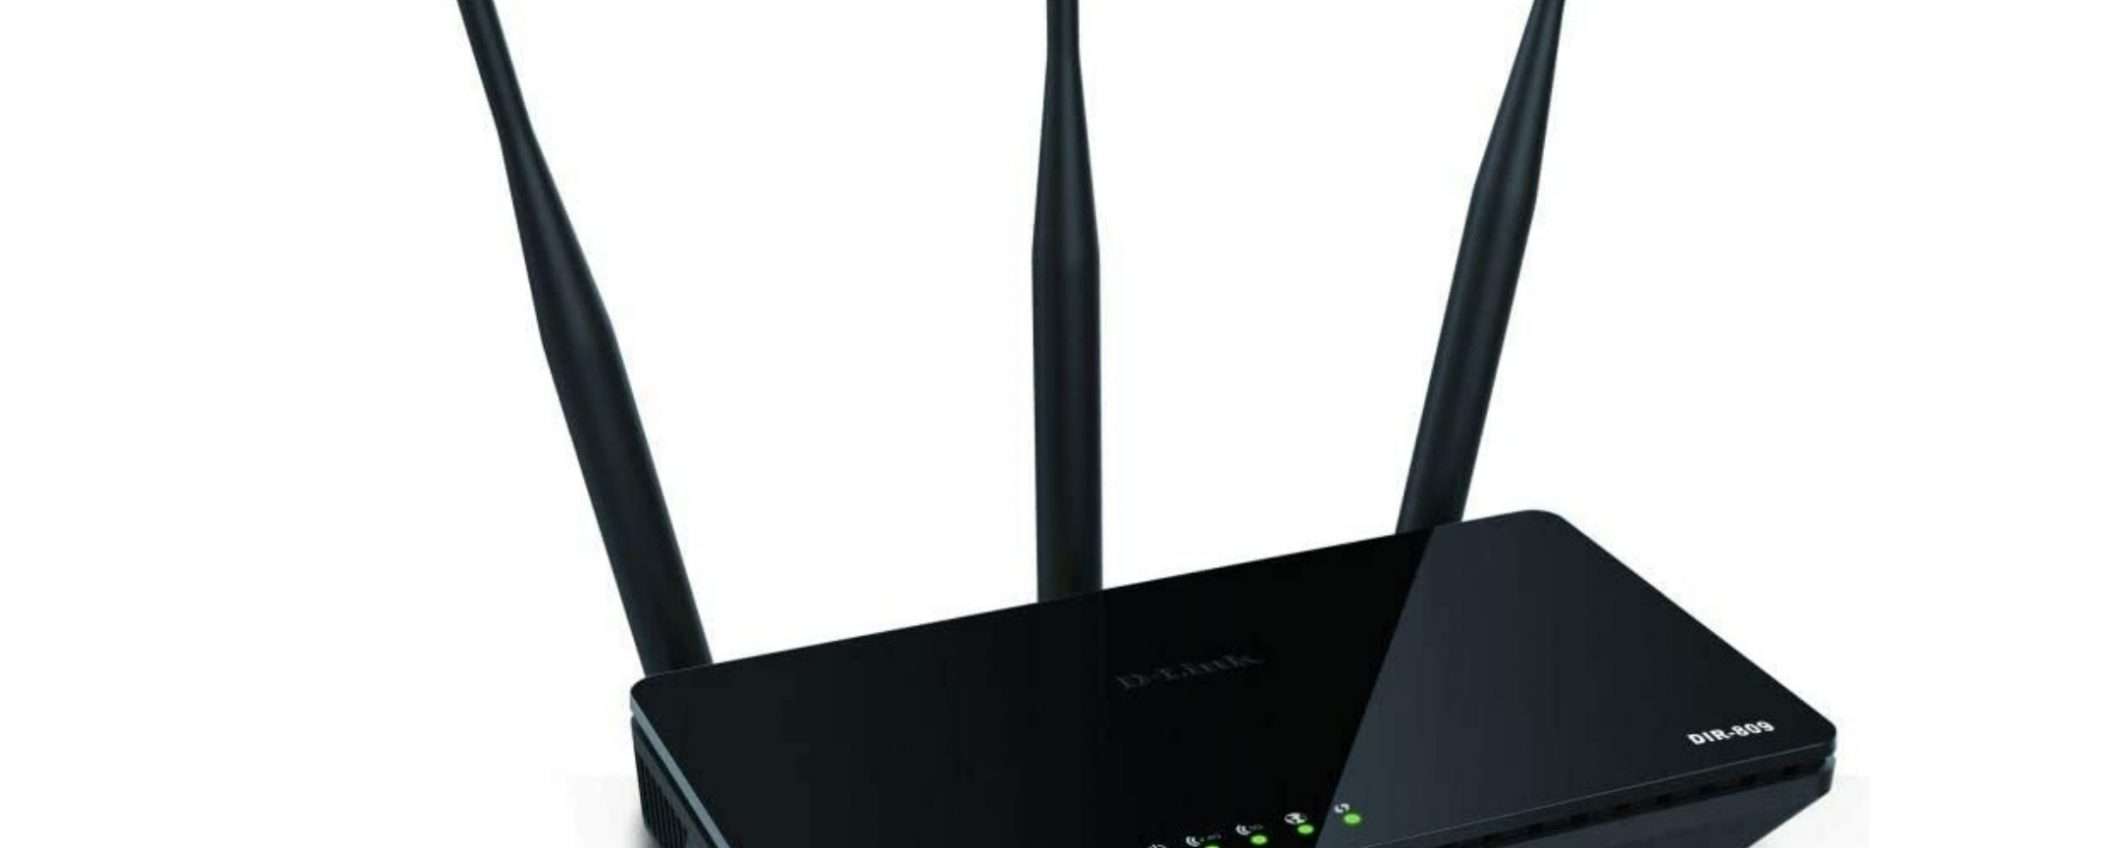 Router D-Link Dual-Band a soli 26,99€ su Amazon